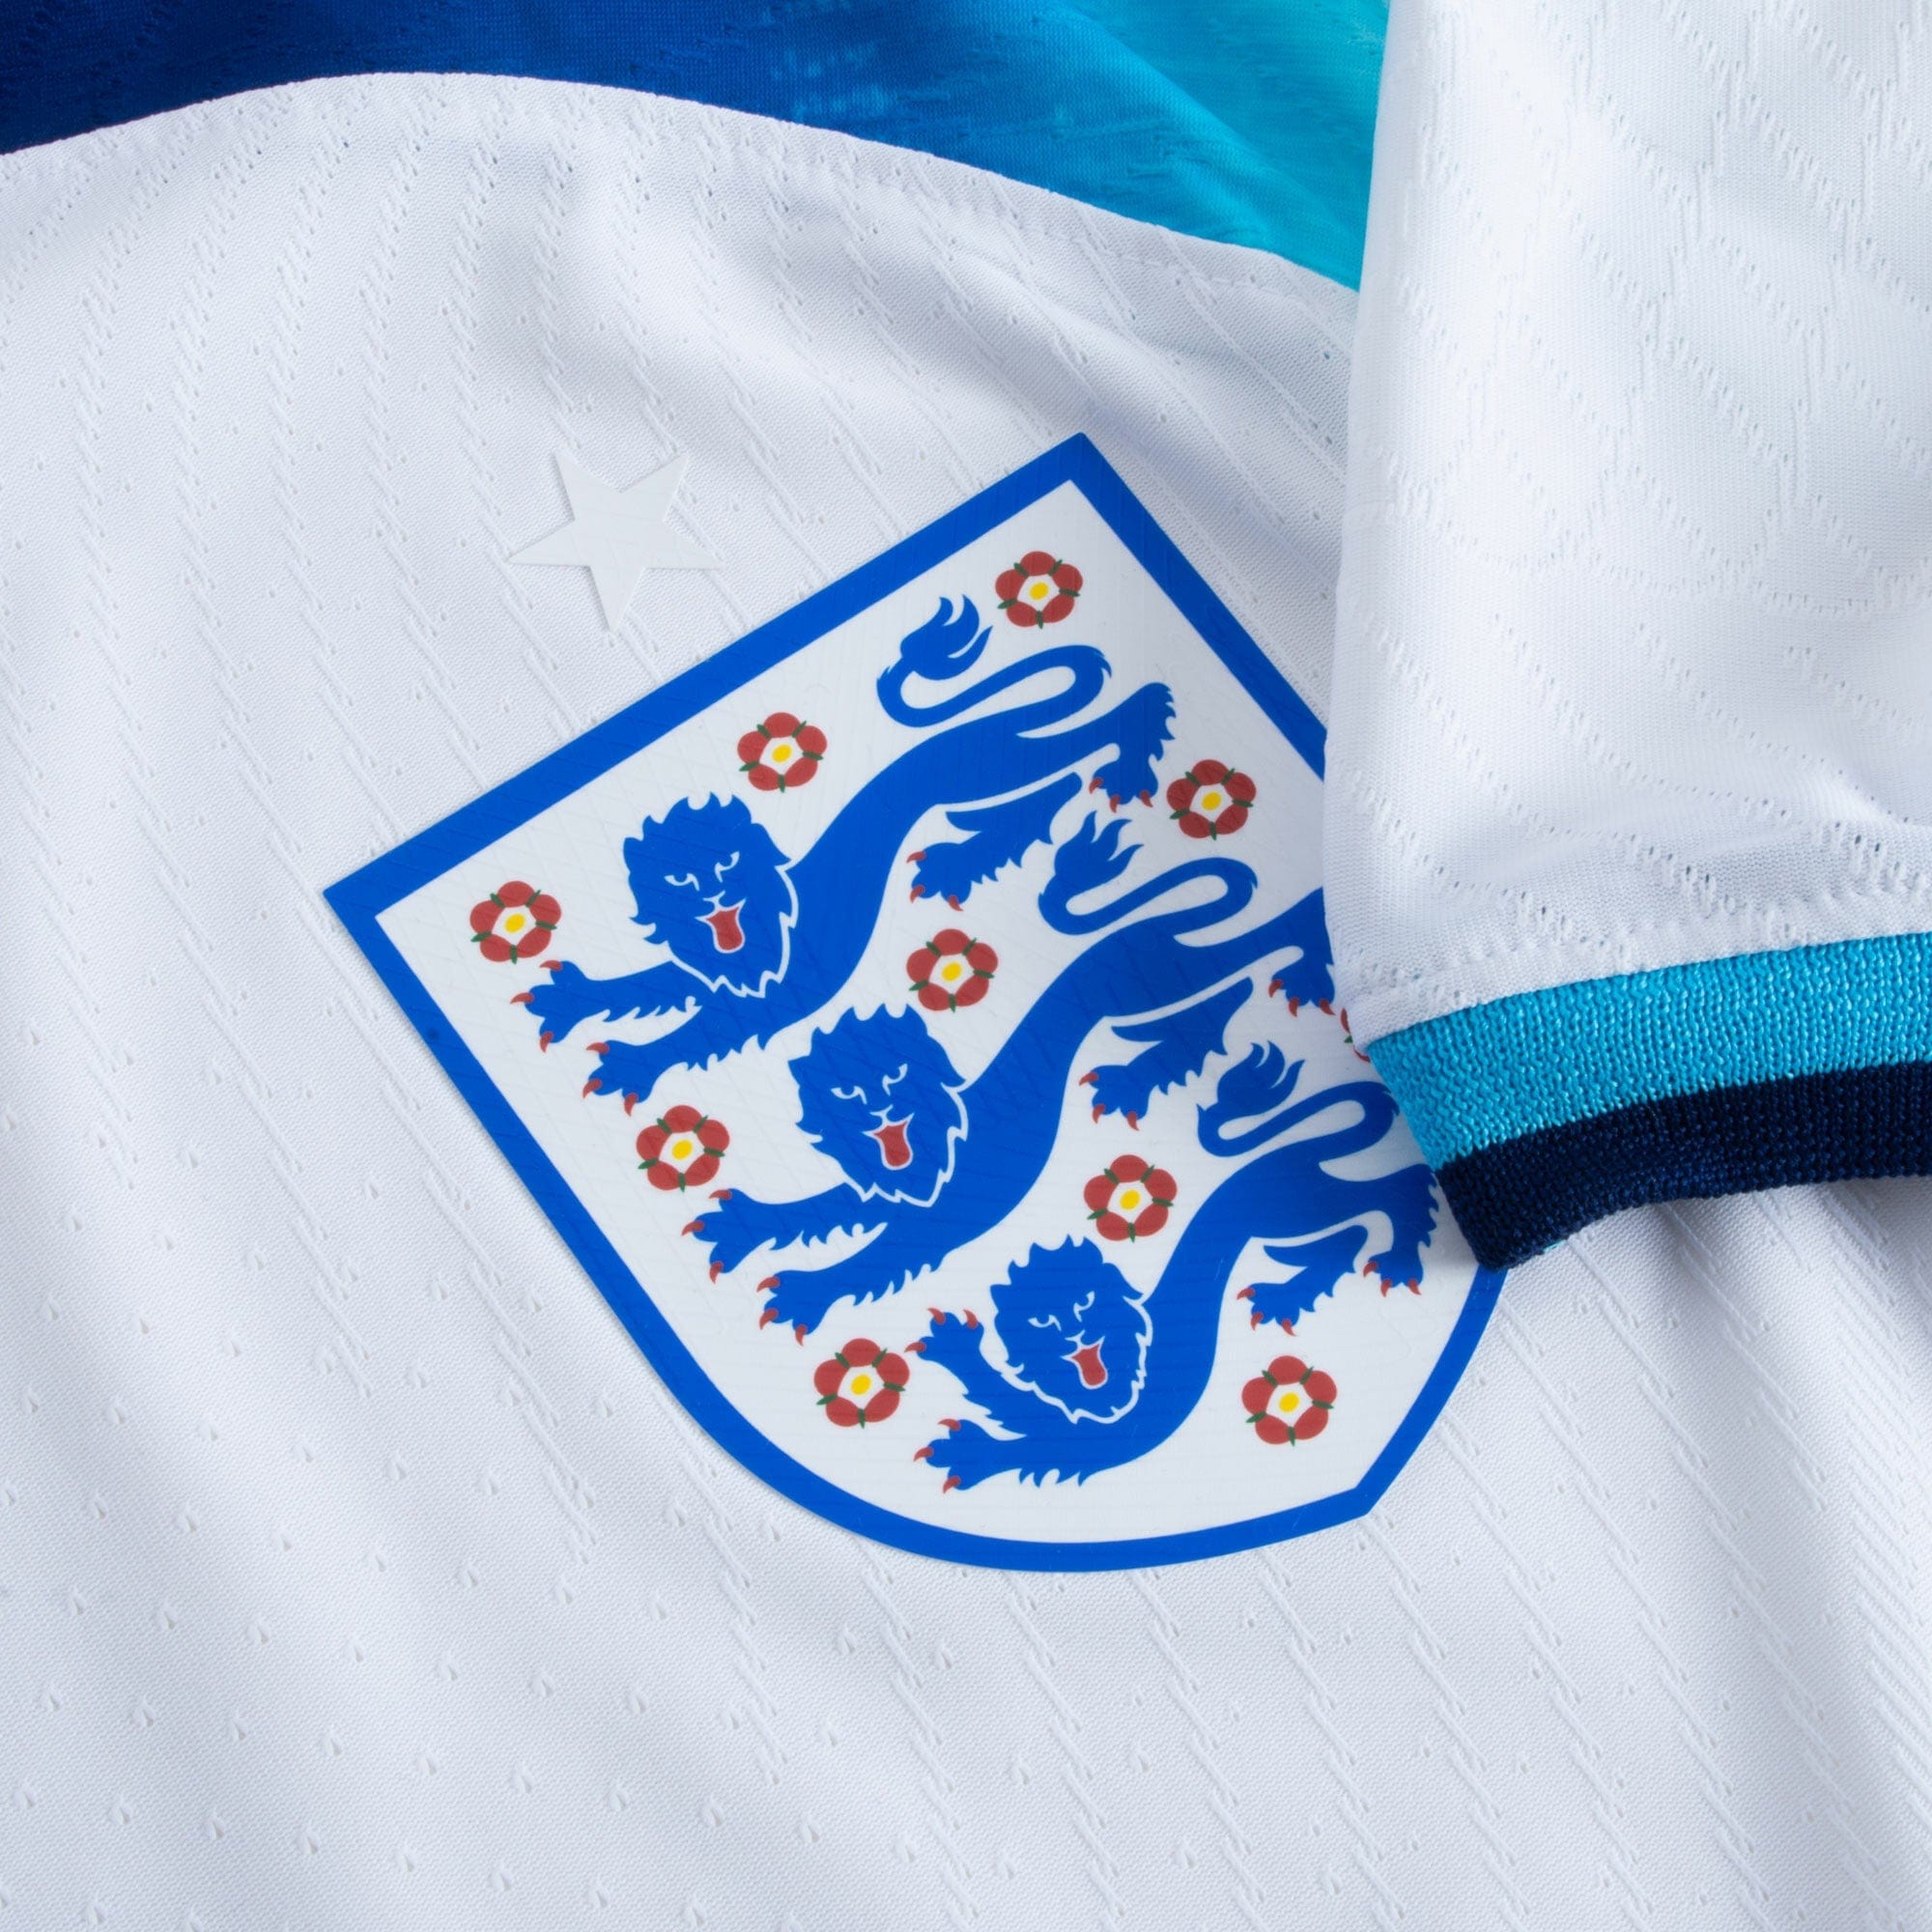 England Home Jersey 22/23 Euro 2024 Qualification